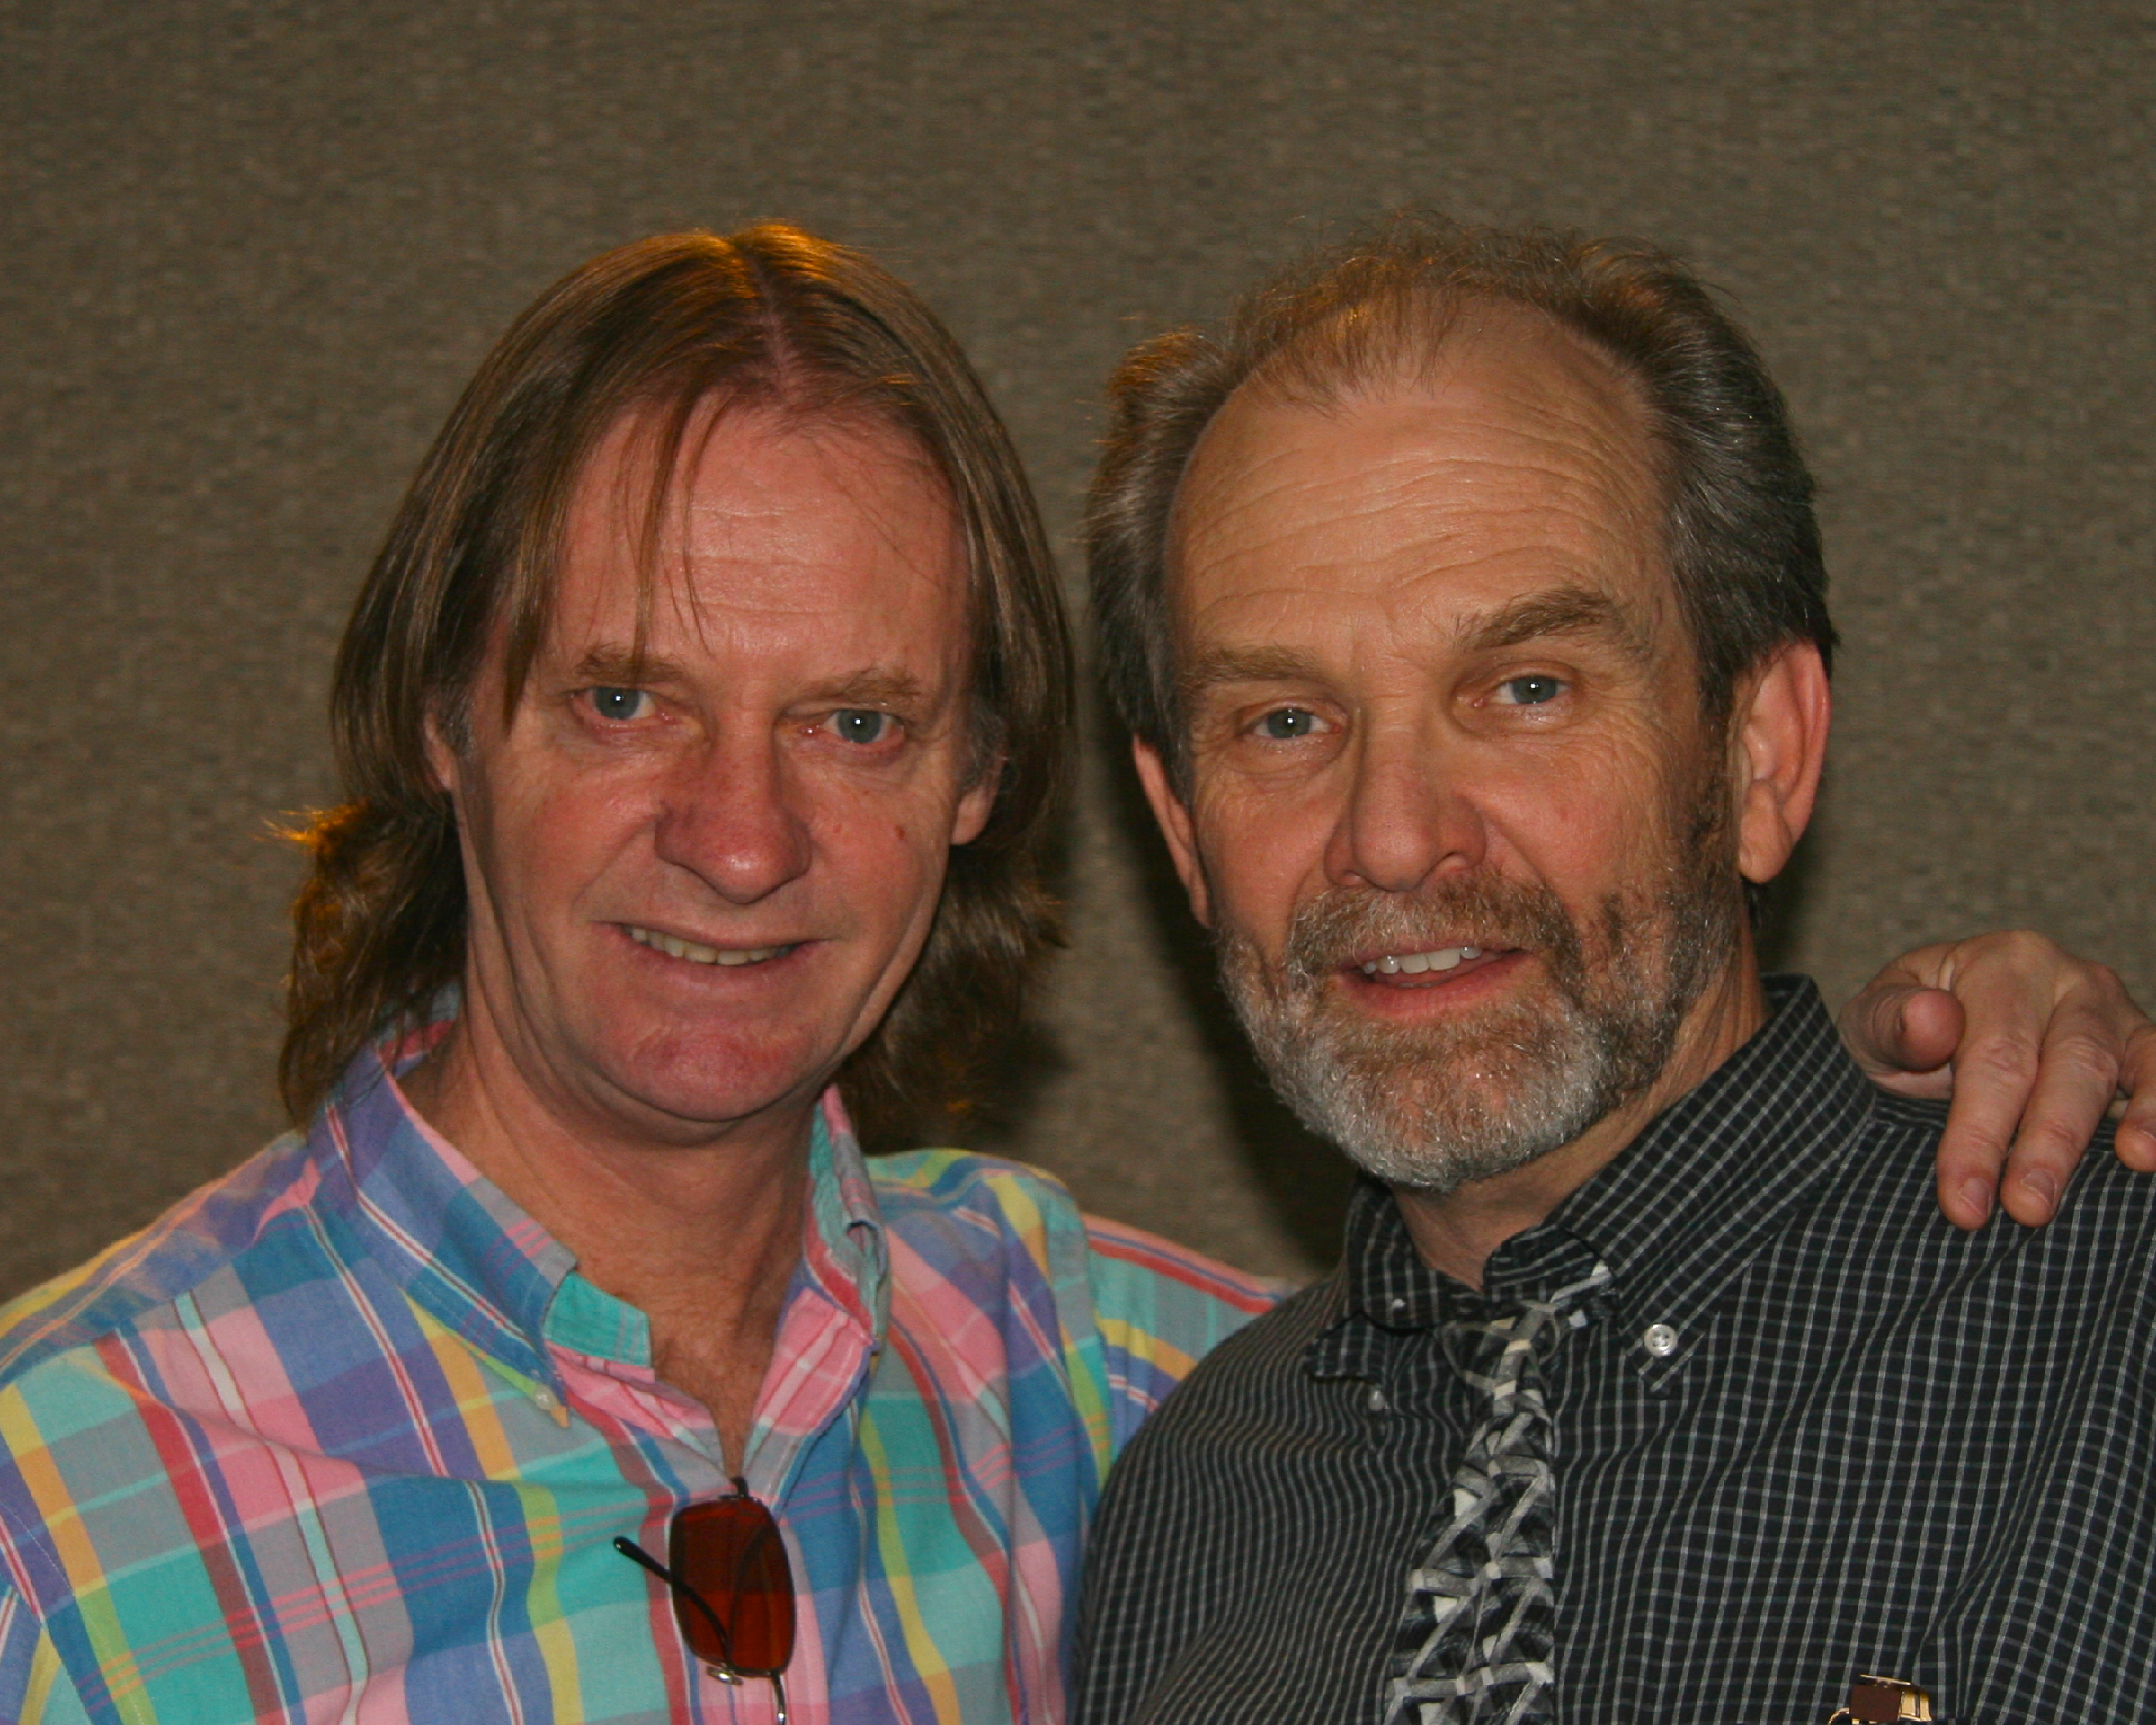 David Russell and Sterling Beeaff, photo credit M.Rodriguez